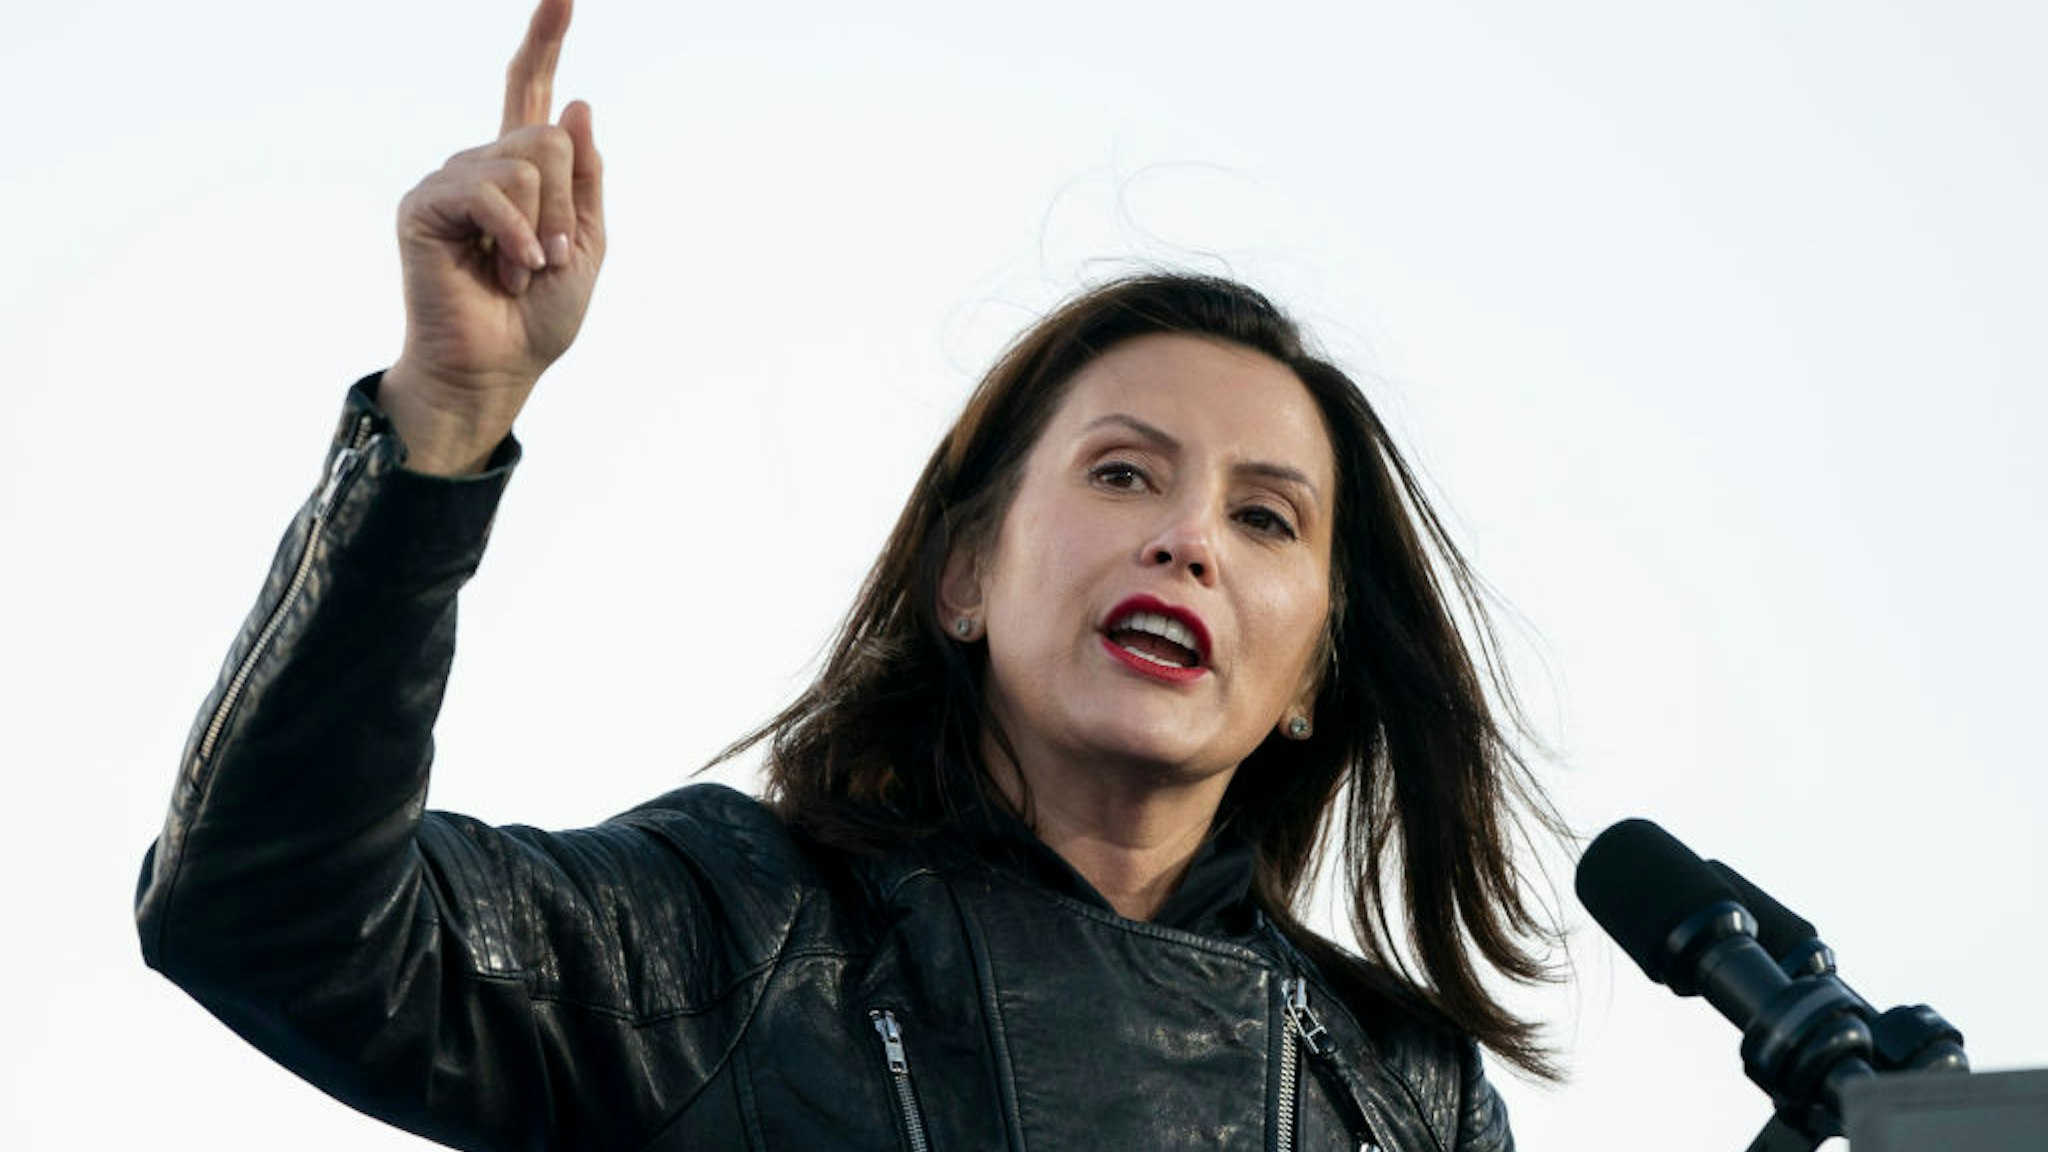 Gov. Gretchen Whitmer speaks during a drive-in campaign rally with Democratic presidential nominee Joe Biden and former President Barack Obama at Belle Isle on October 31, 2020 in Detroit, Michigan.